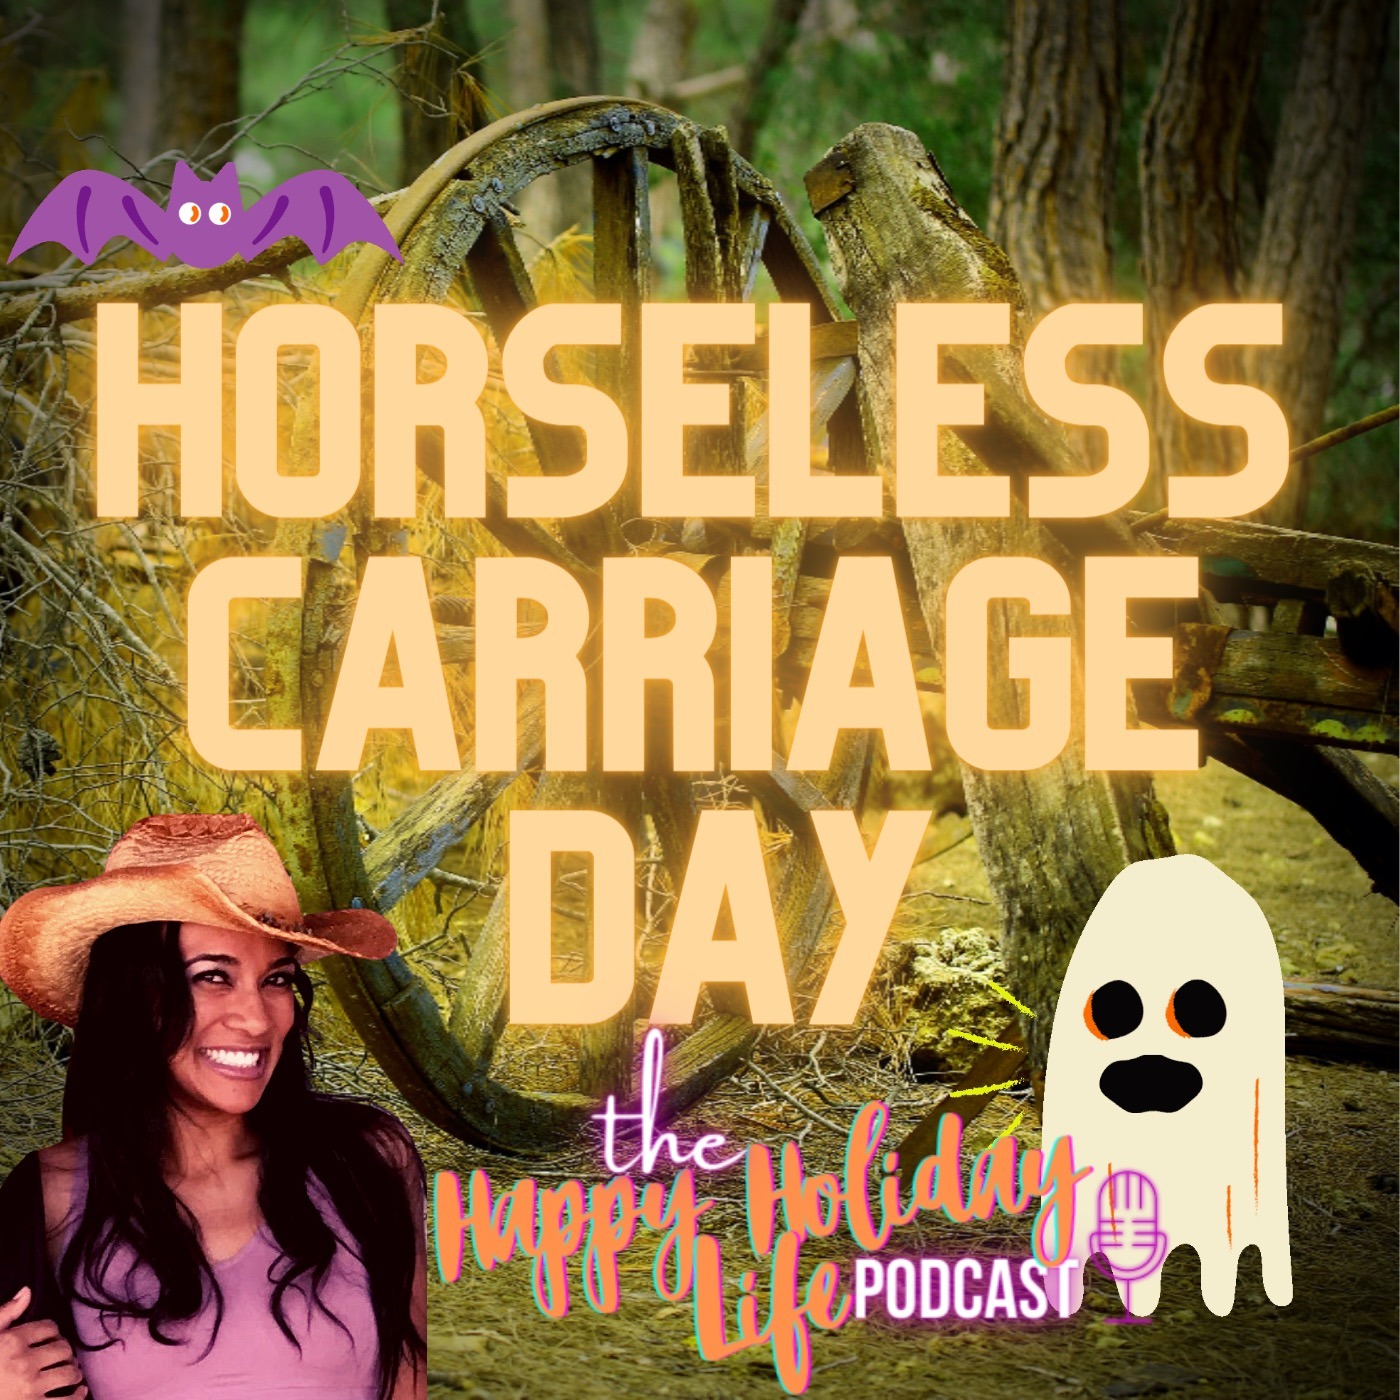 Episode #009 Horseless Carriage Day!